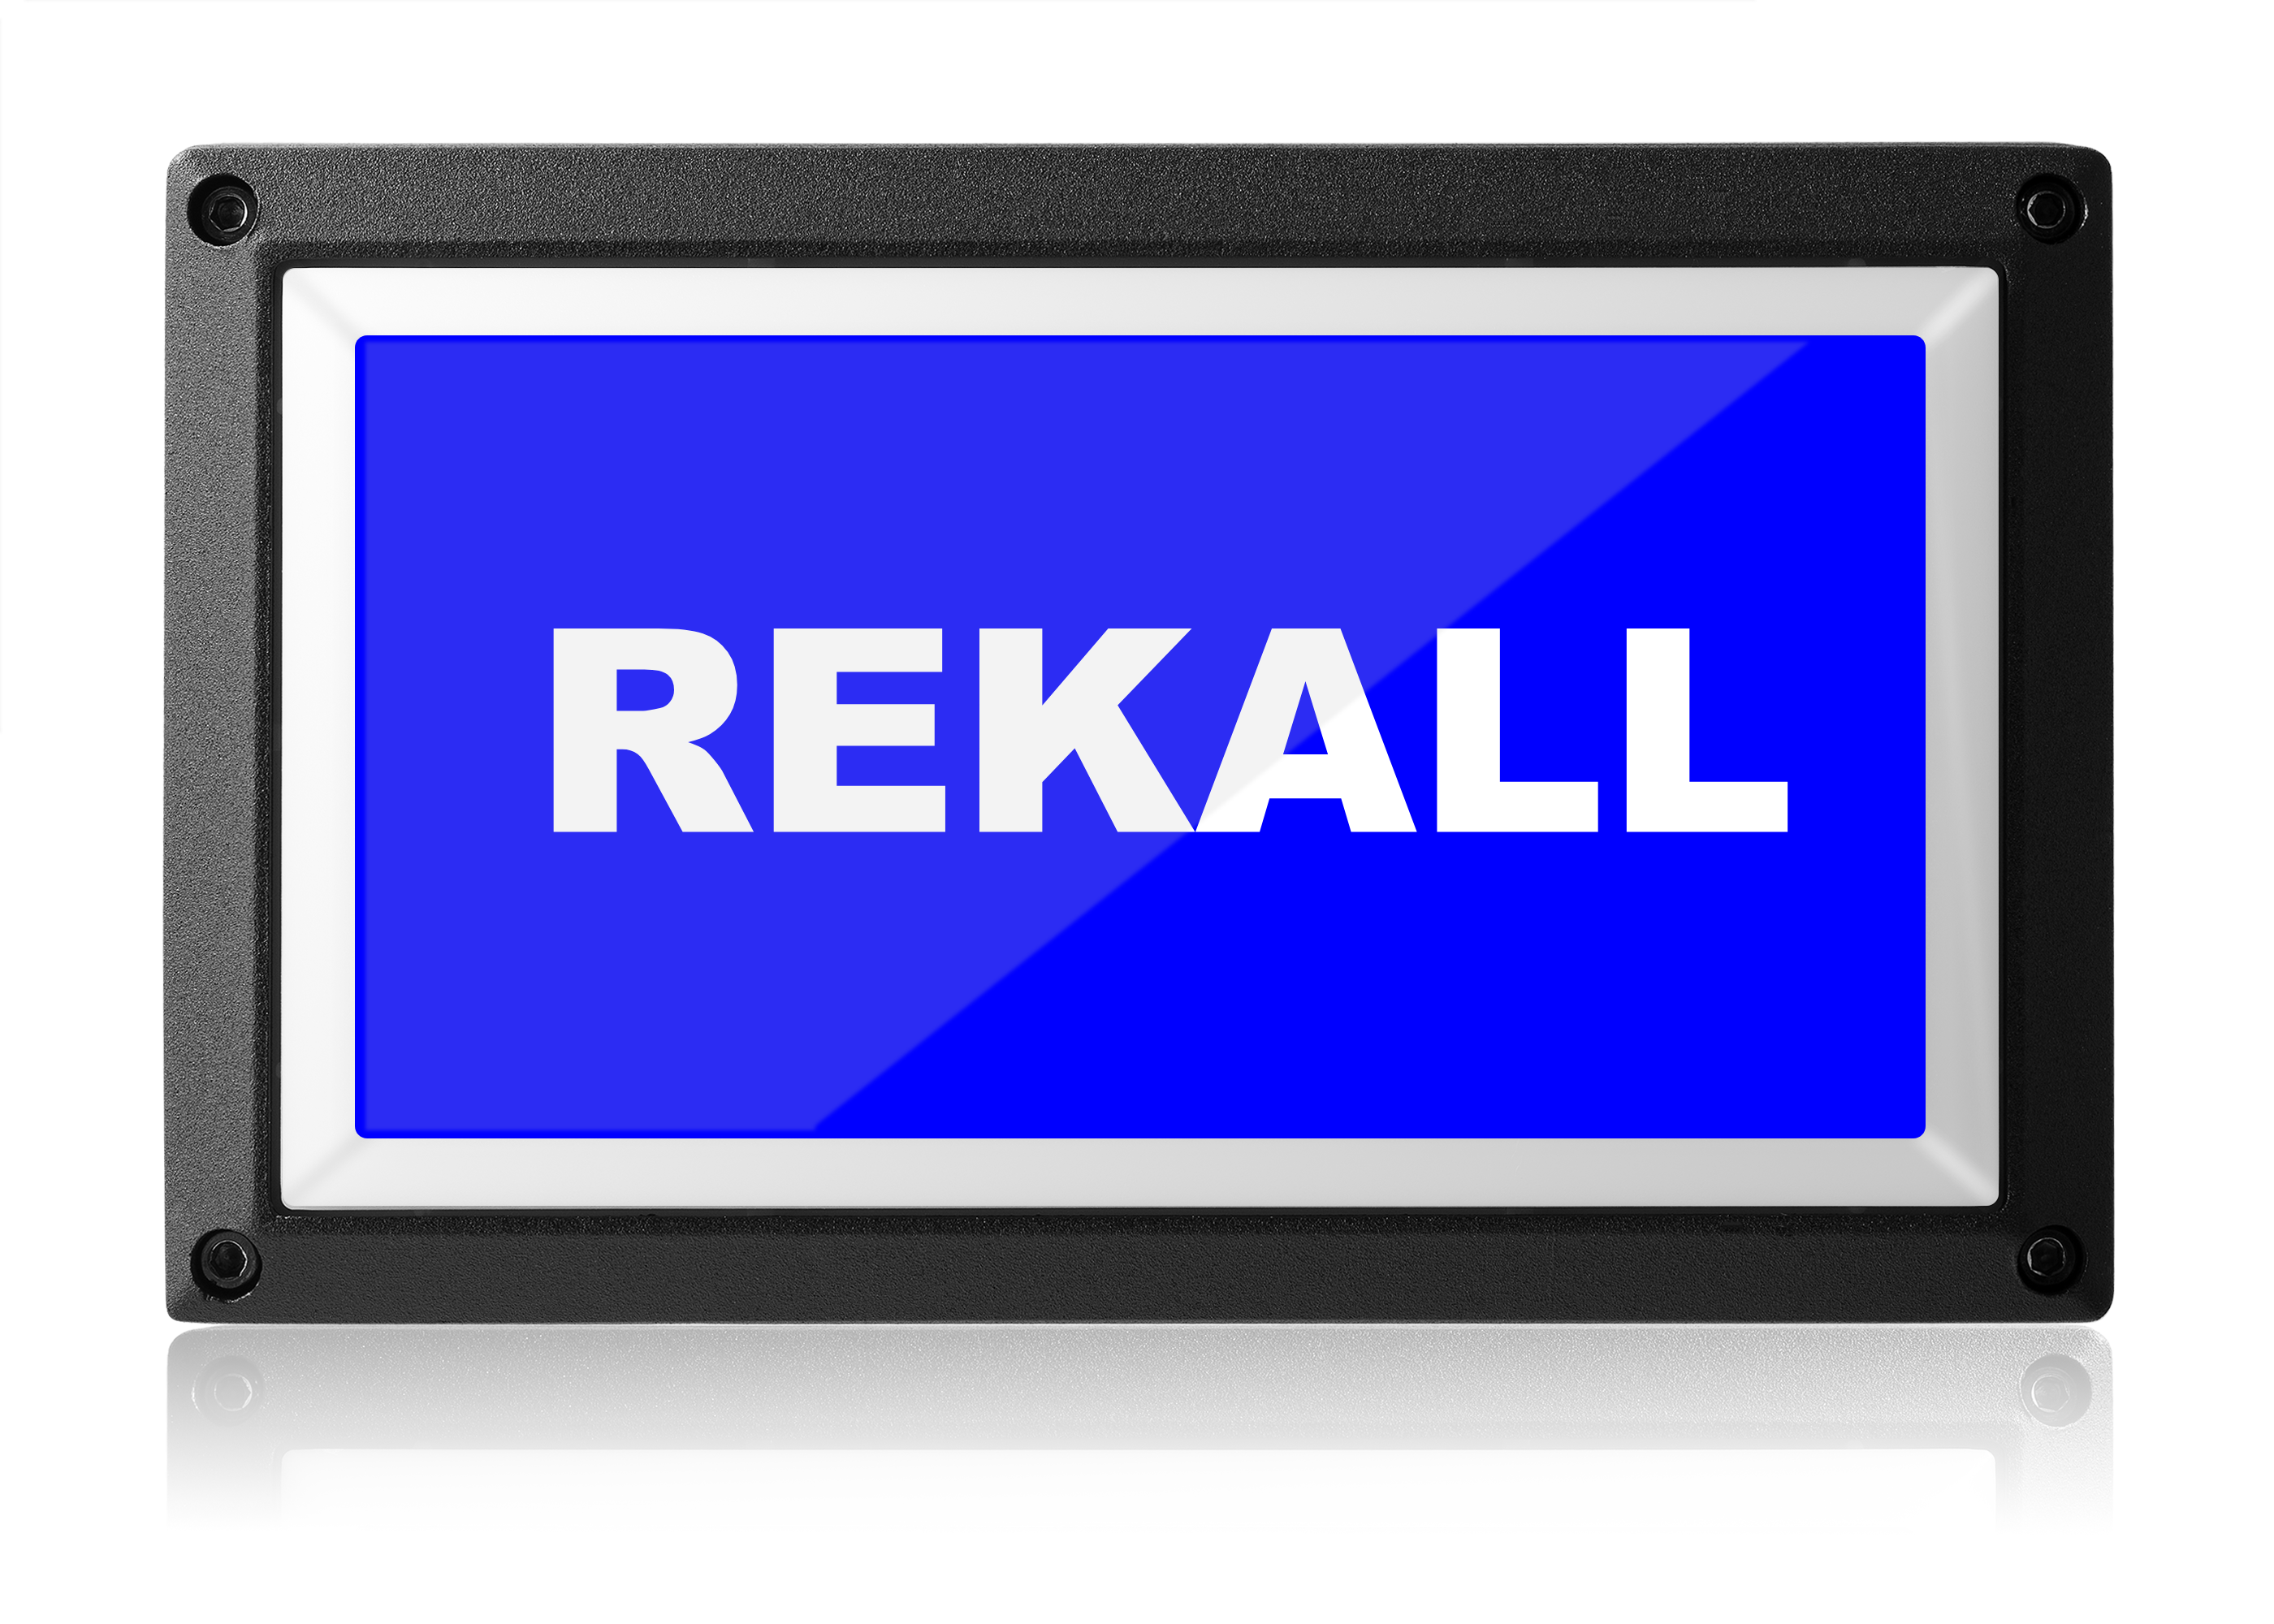 CT Scan In-Use Light - Rekall Dynamics LED Sign